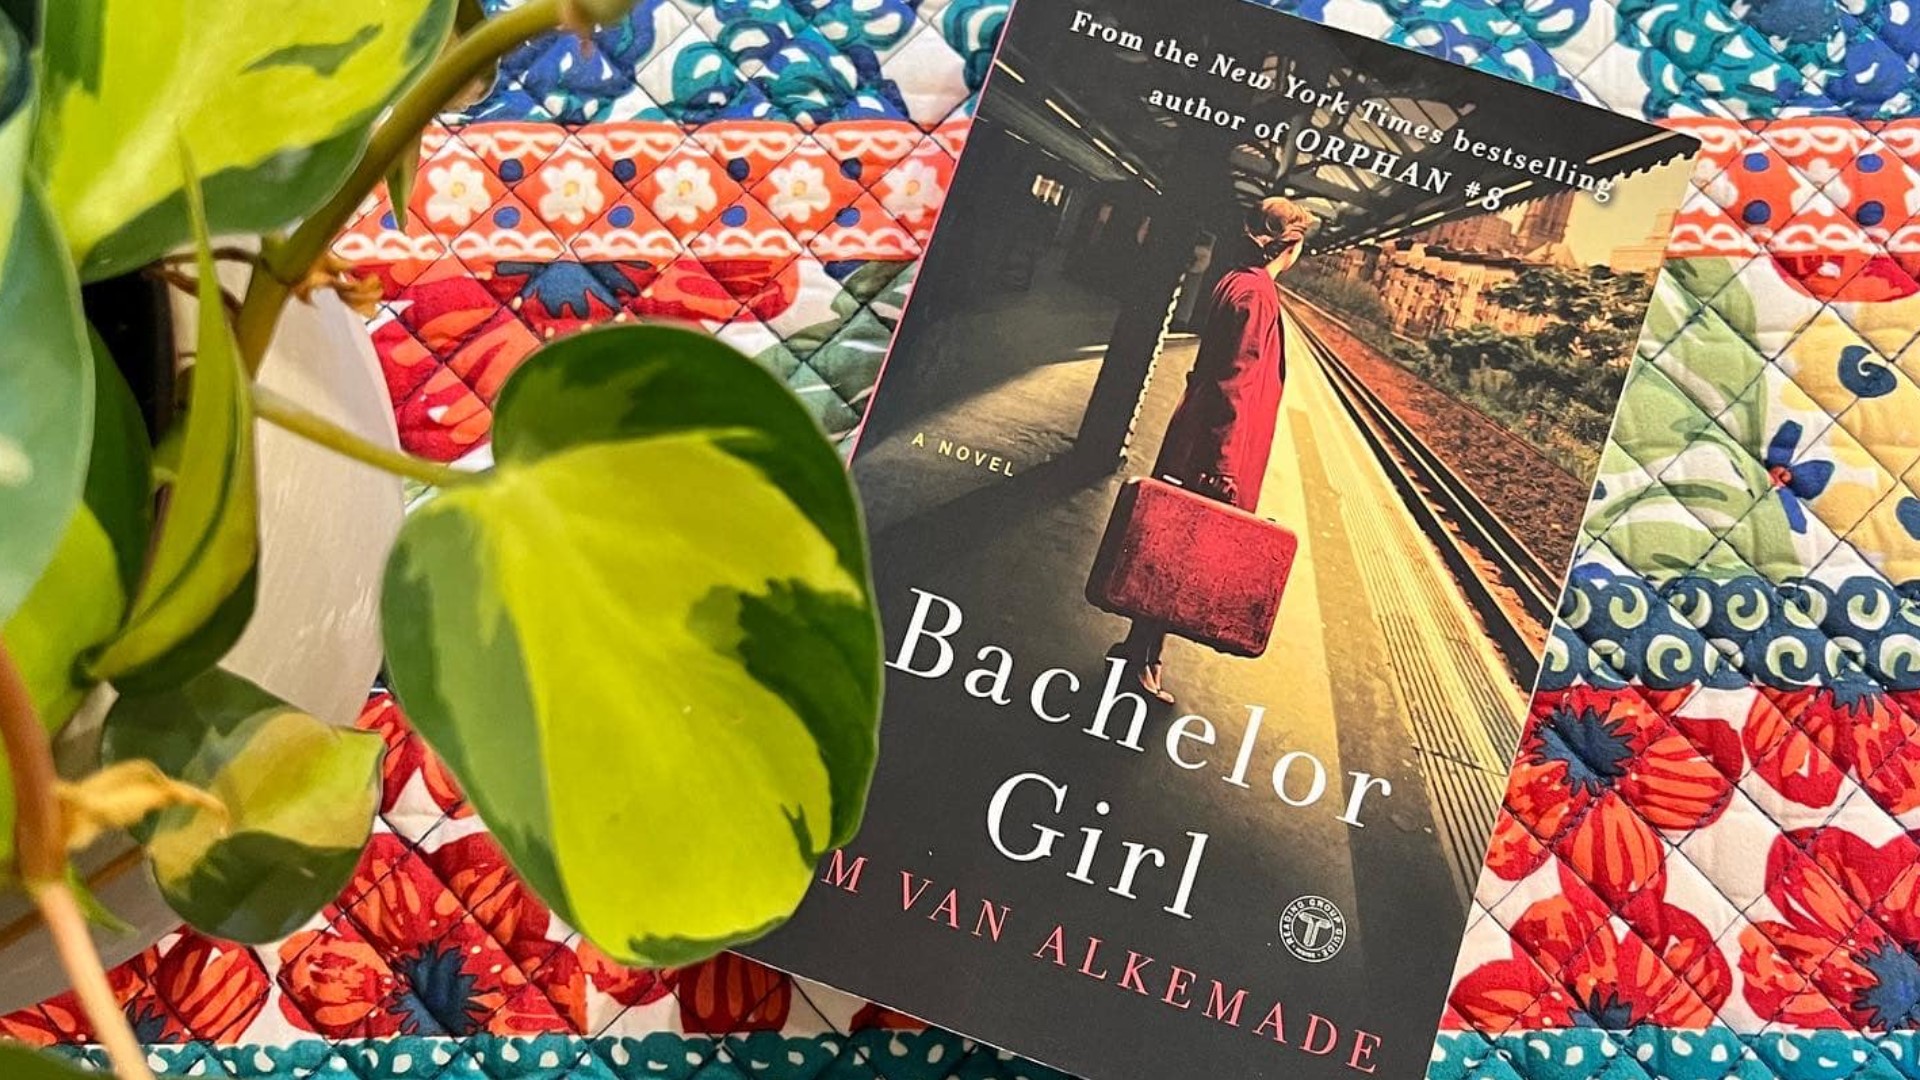 Kim van Alkemade is the author of "Bachelor Girl," FOX43's Book Club pick of the month for April, and several other historical fiction novels.